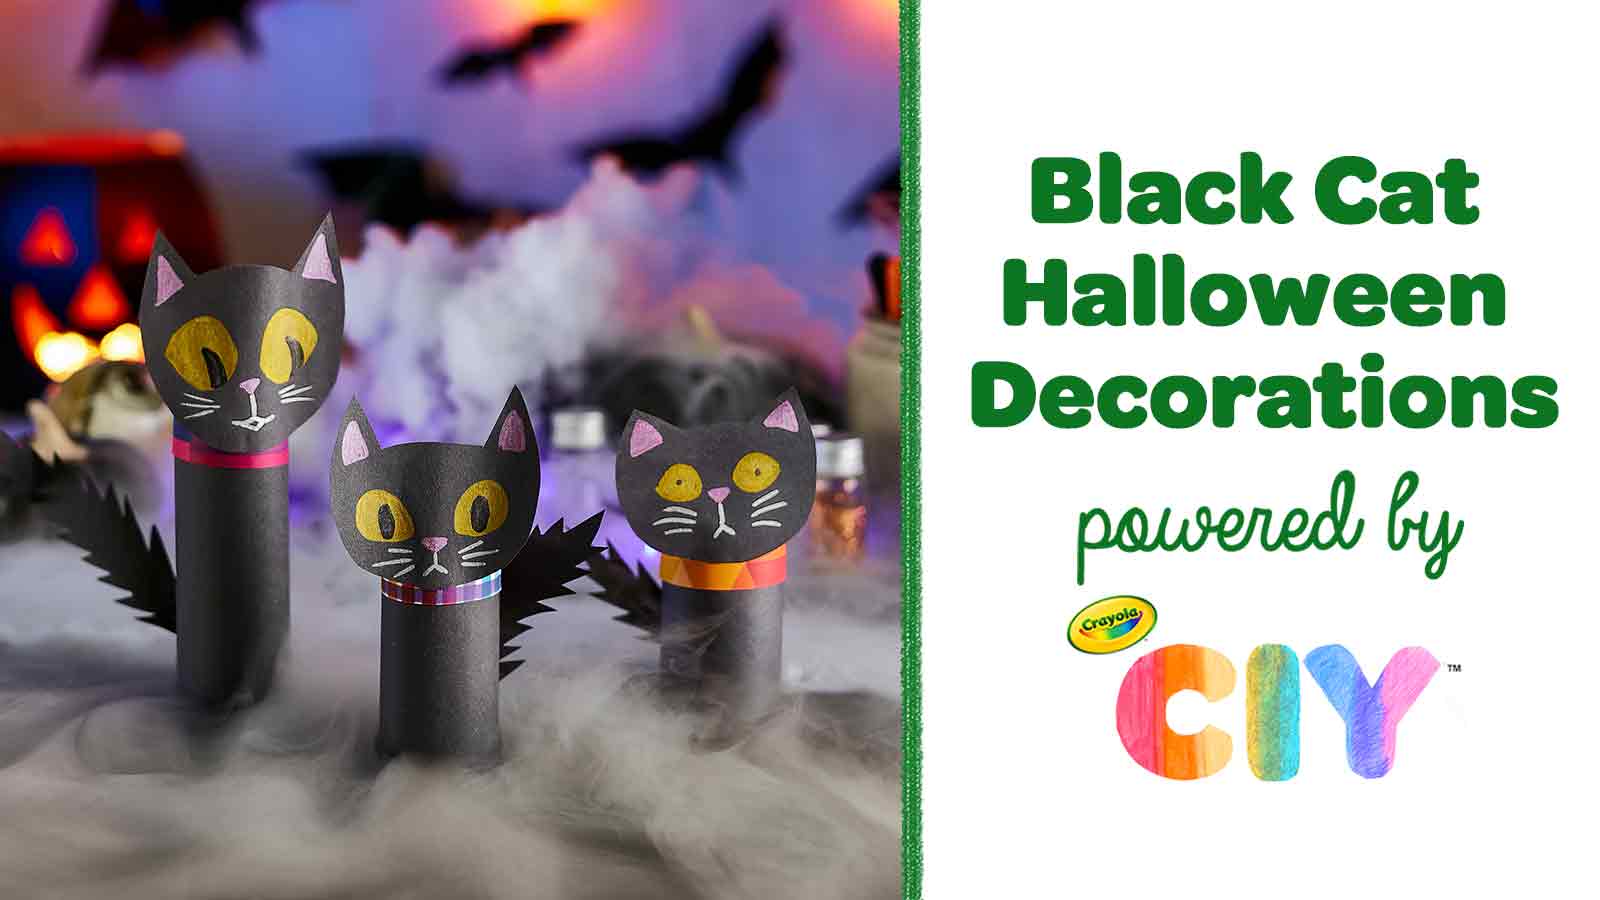 Black Cat Halloween Decorations | Crafts  | Crayola CIY, DIY  Crafts for Kids and Adults 